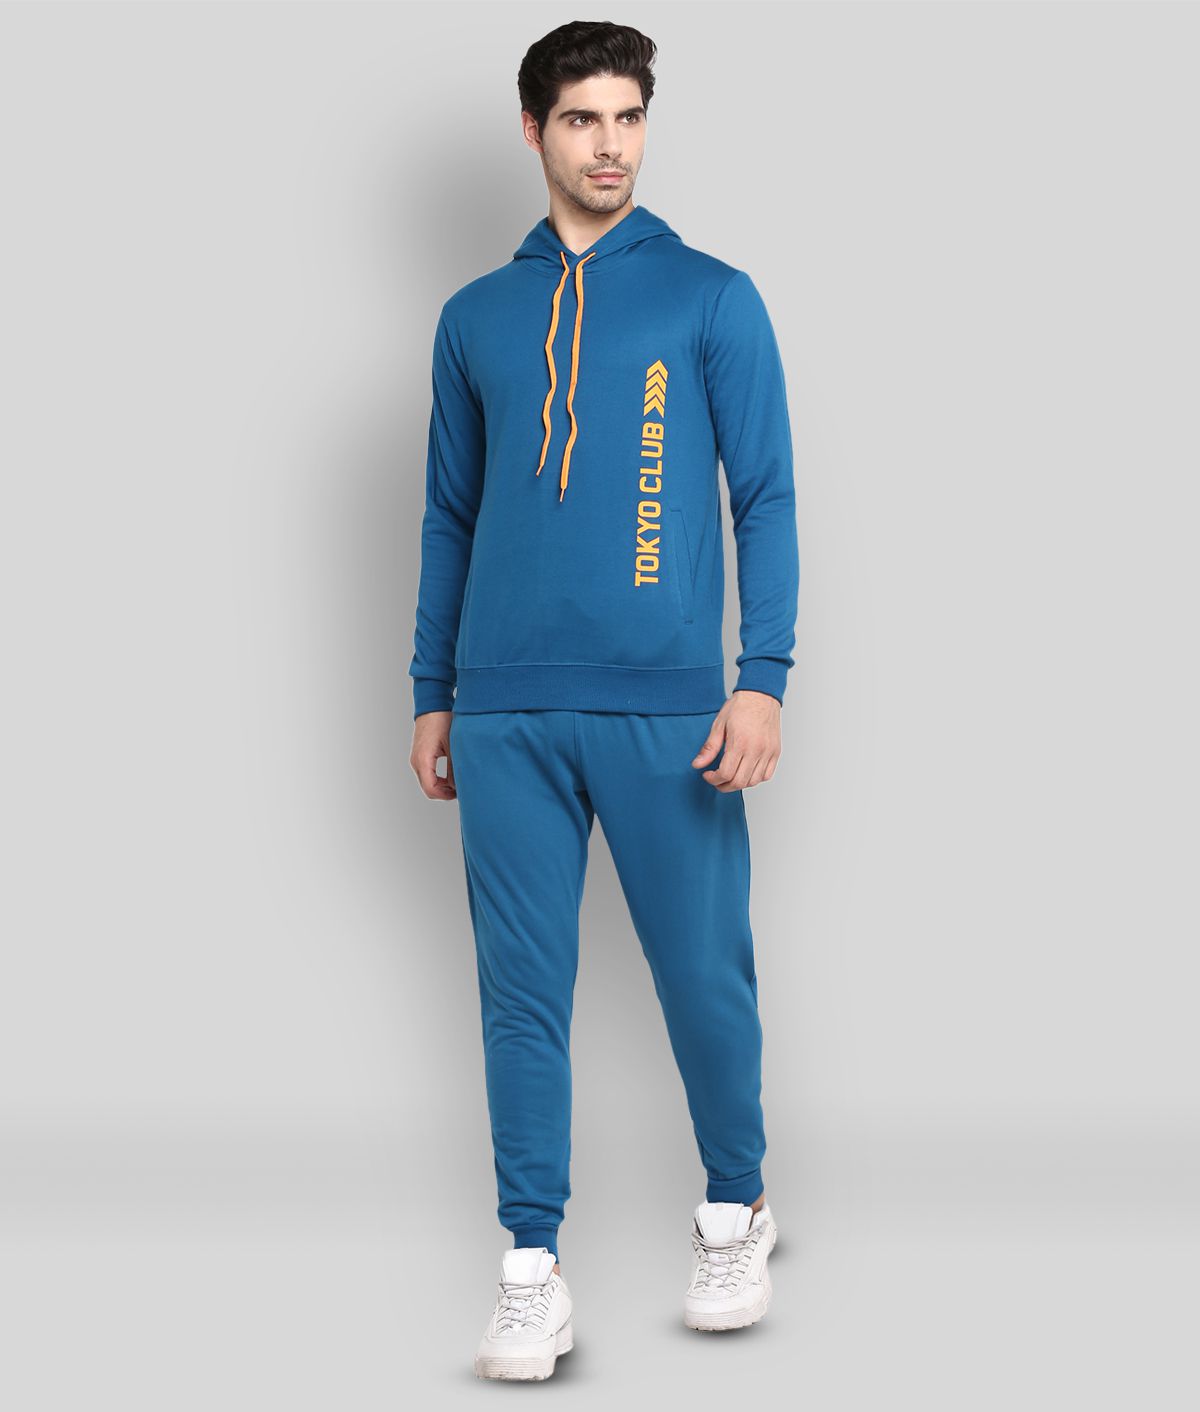     			OFF LIMITS - Blue Polyester Regular Fit Printed Men's Sports Tracksuit ( Pack of 1 )